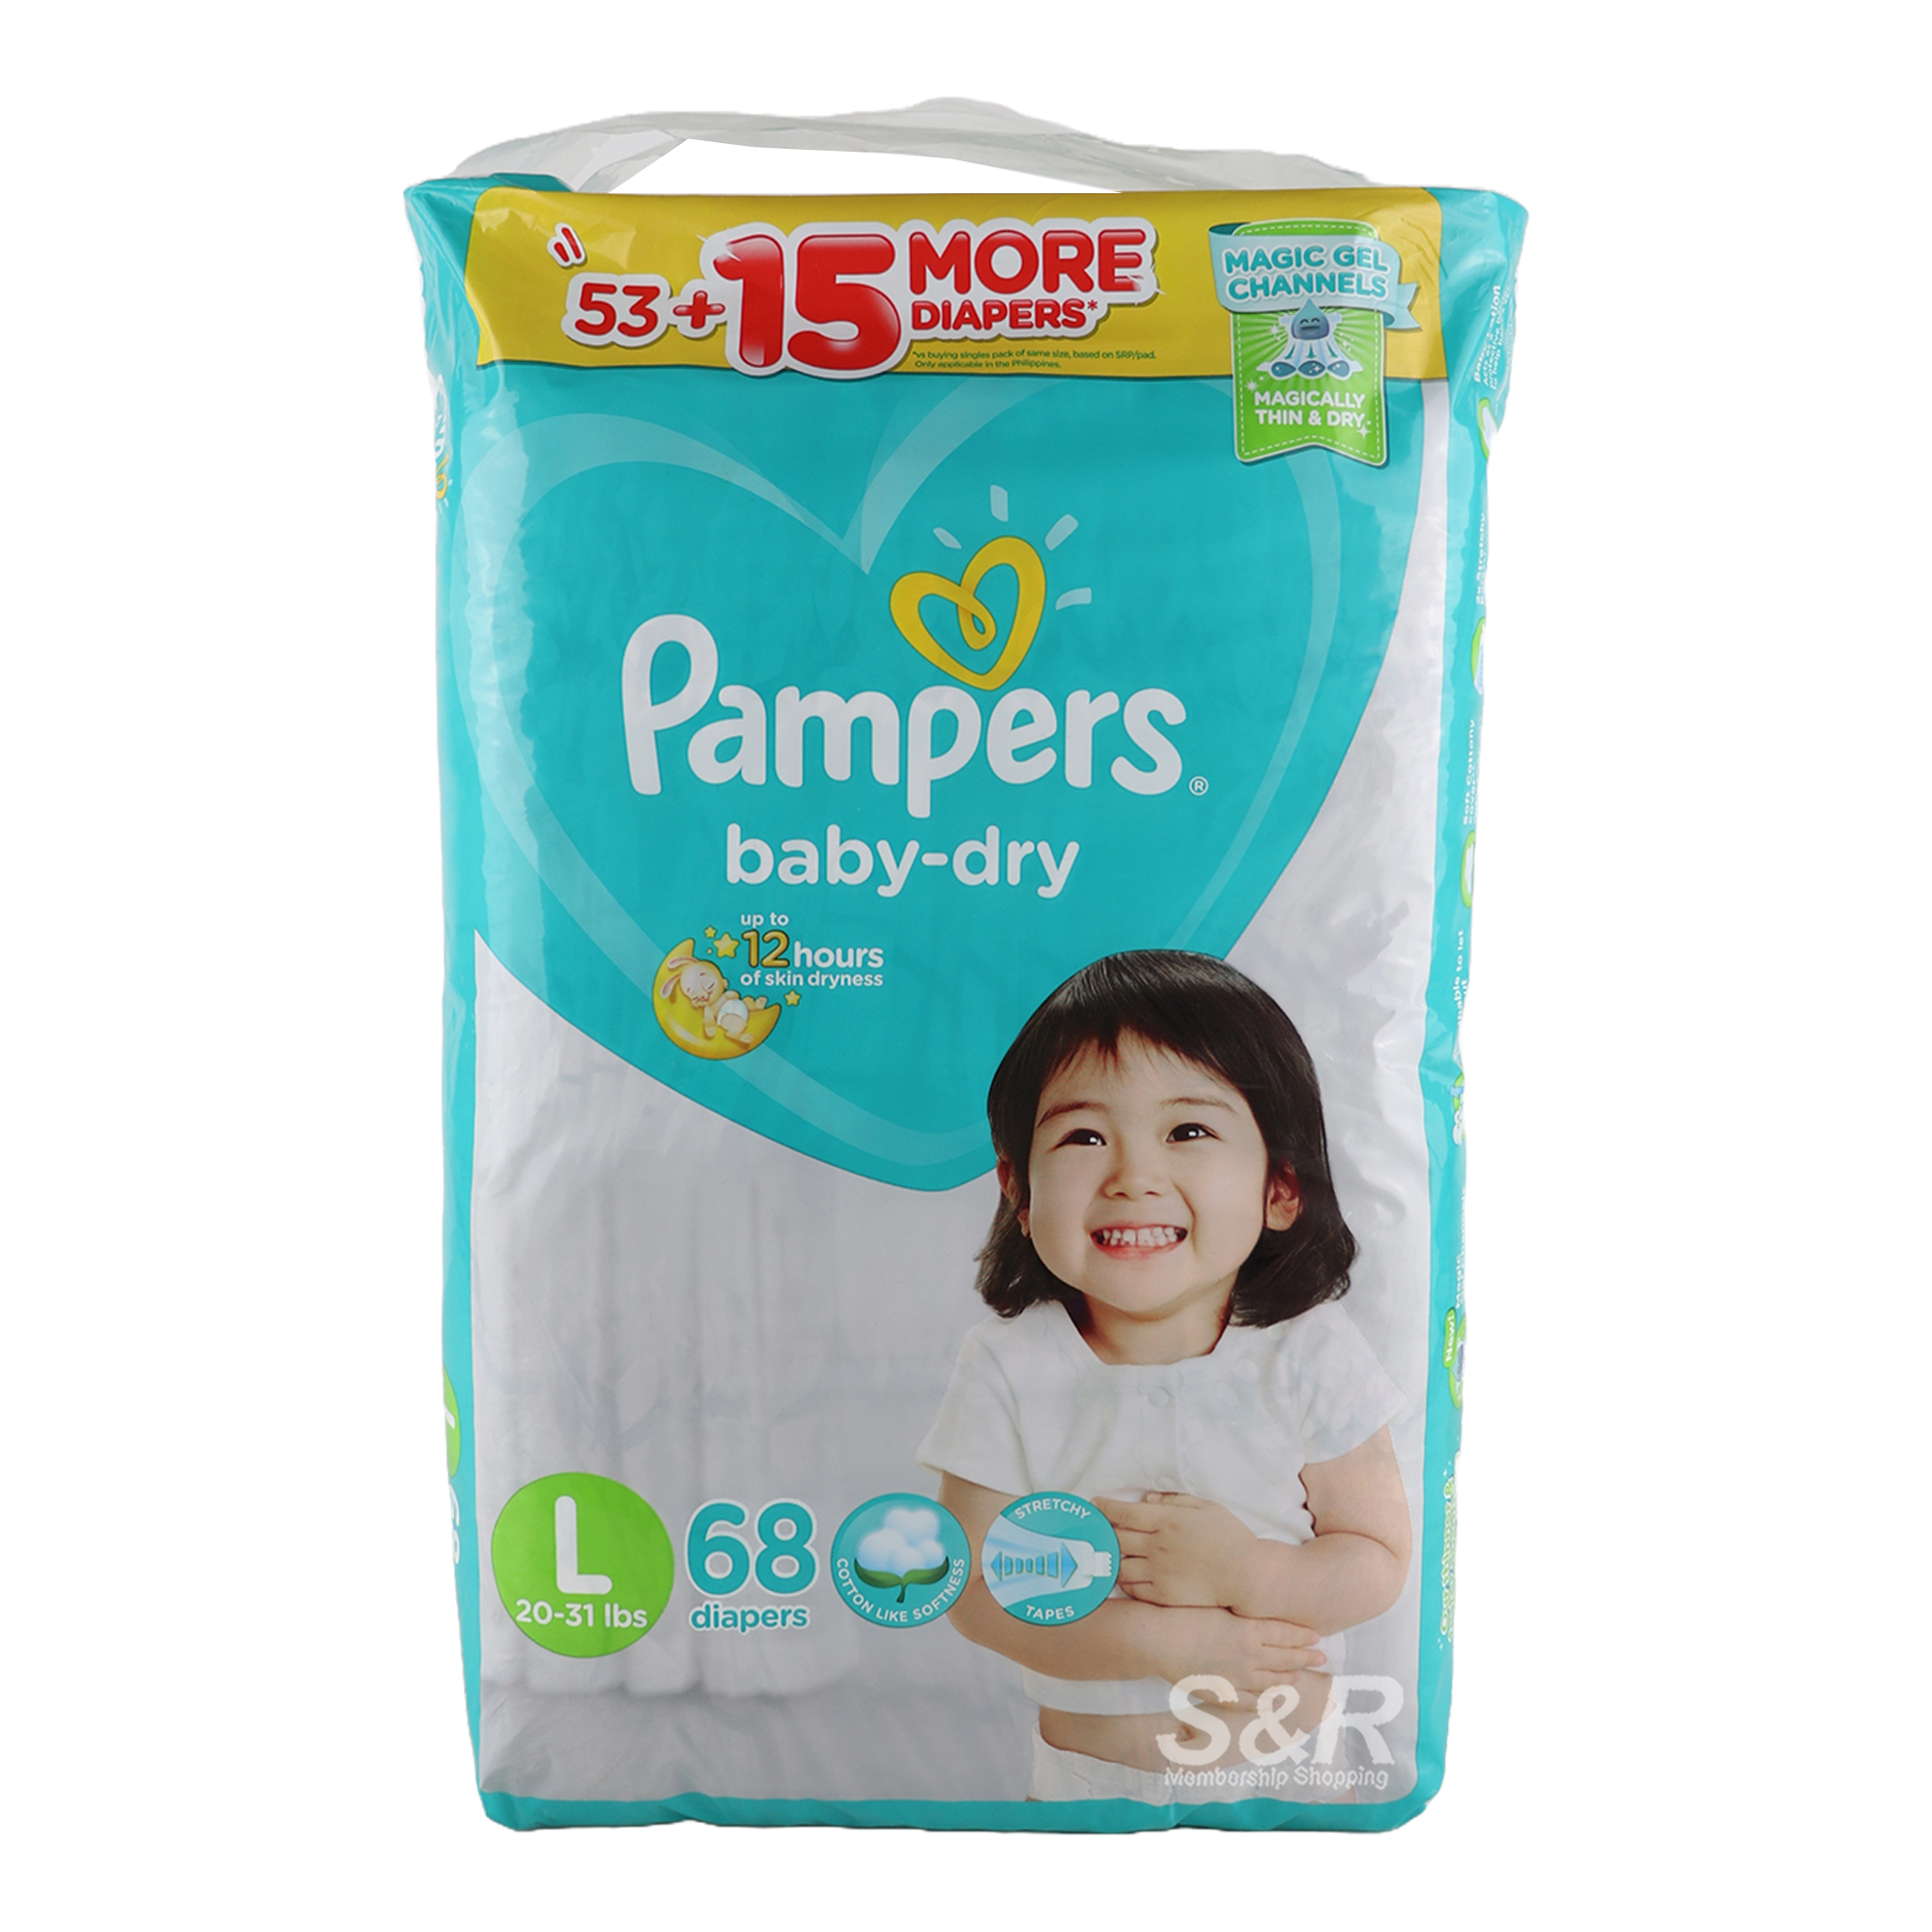 Pampers Baby-dry Tape Large Disposable Diapers 68pcs